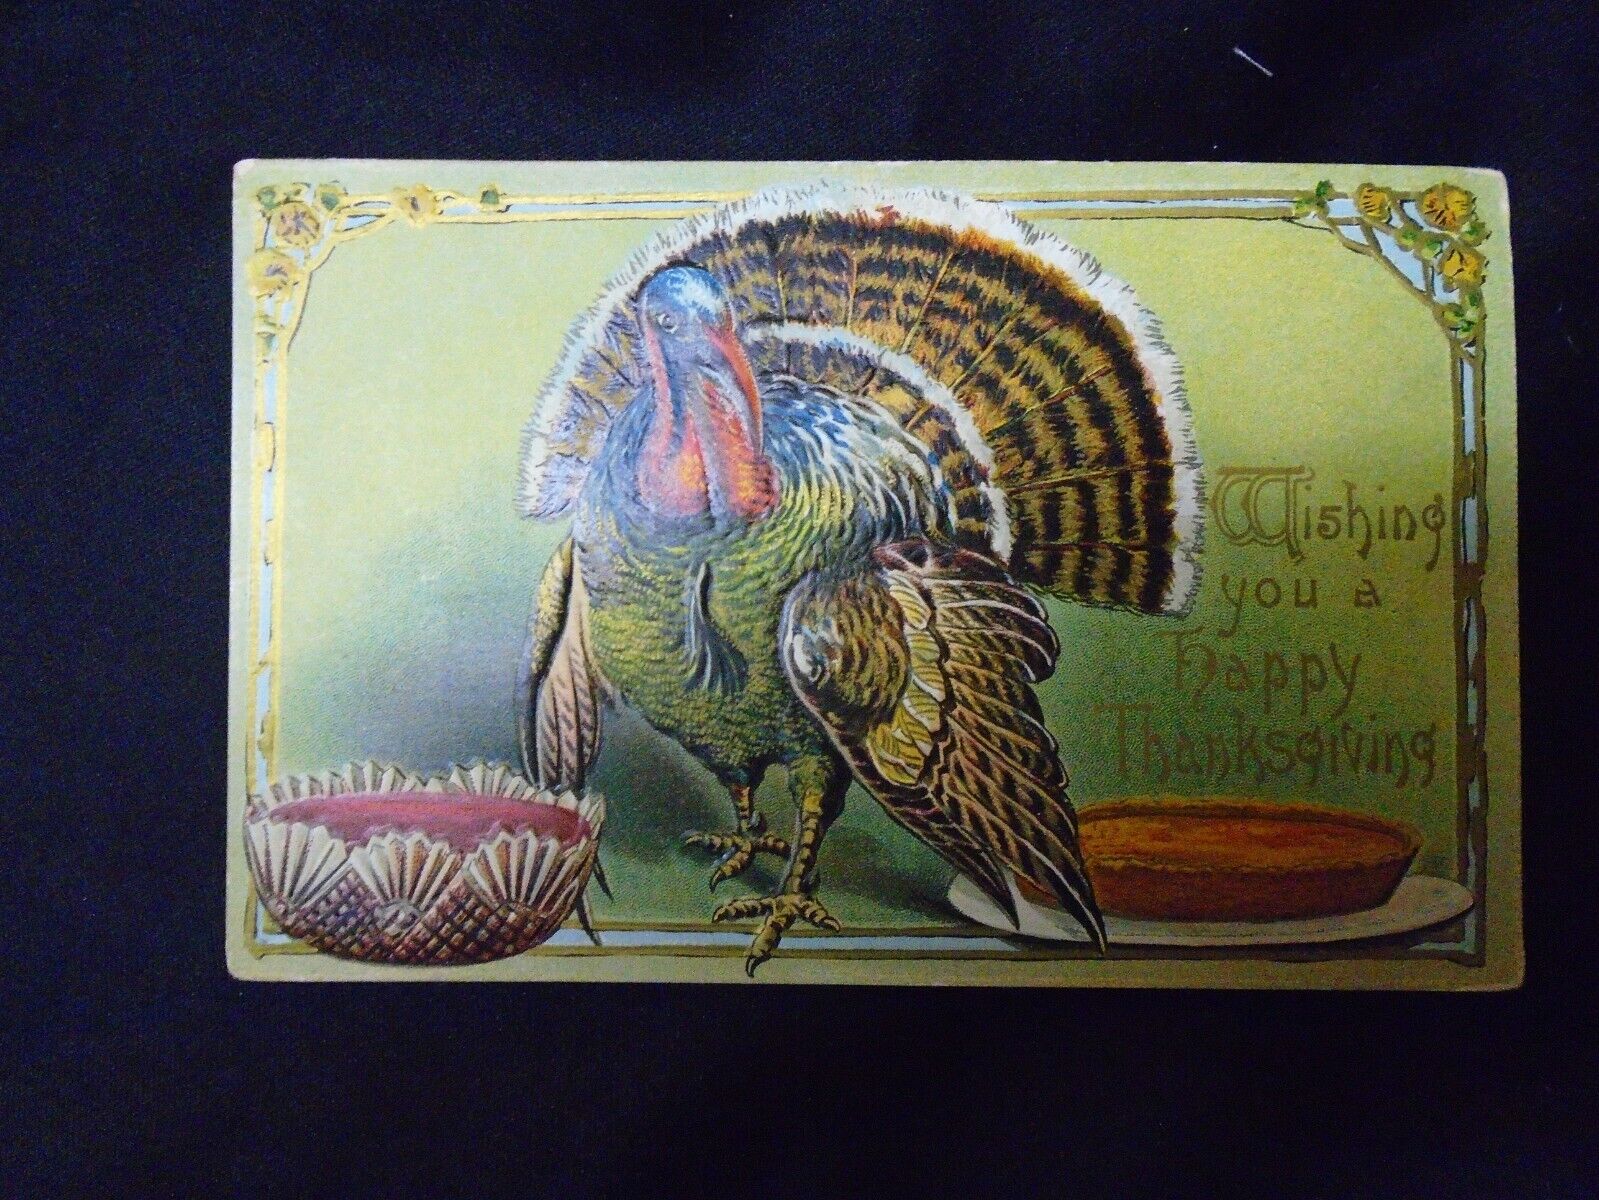 1914 Wishing You A Happy Thanksgiving, Turkey With Pies Embossed Postcard